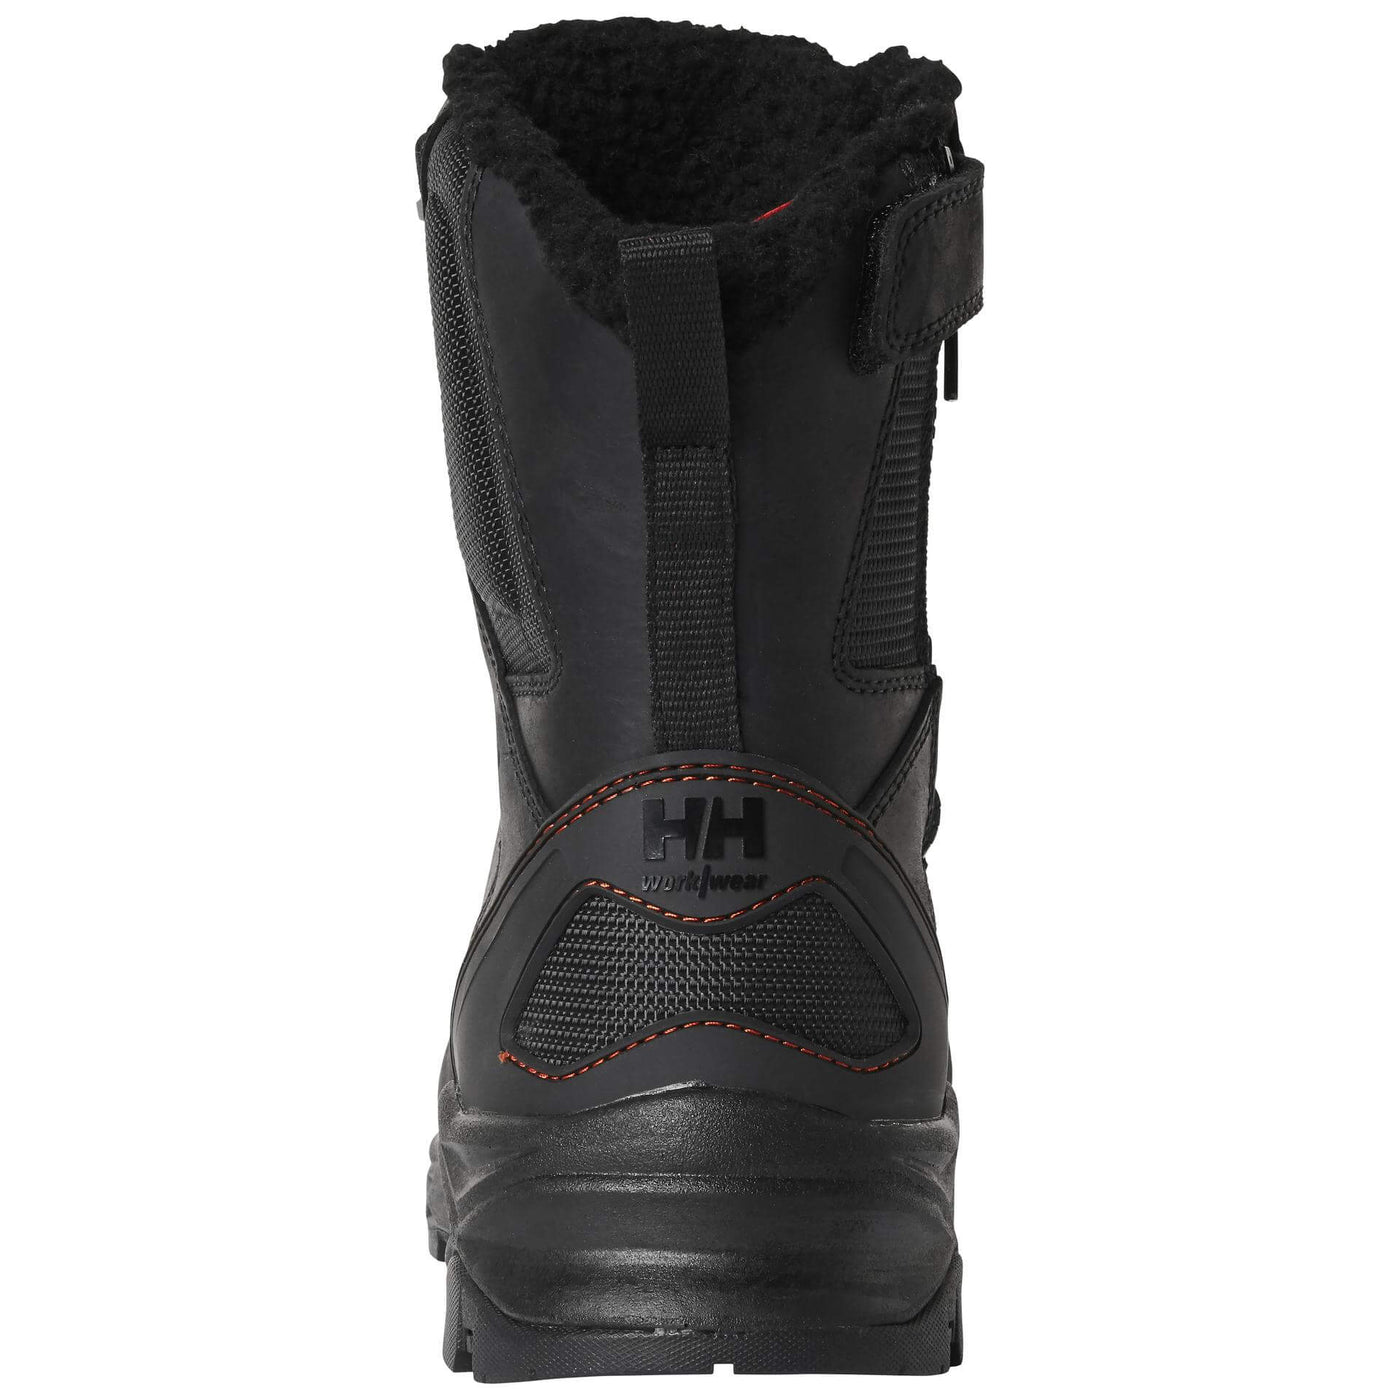 Helly Hansen Oxford Insulated Tall Composite Toe Cap Winter Safety Work Boots Black 4 Sole #colour_black